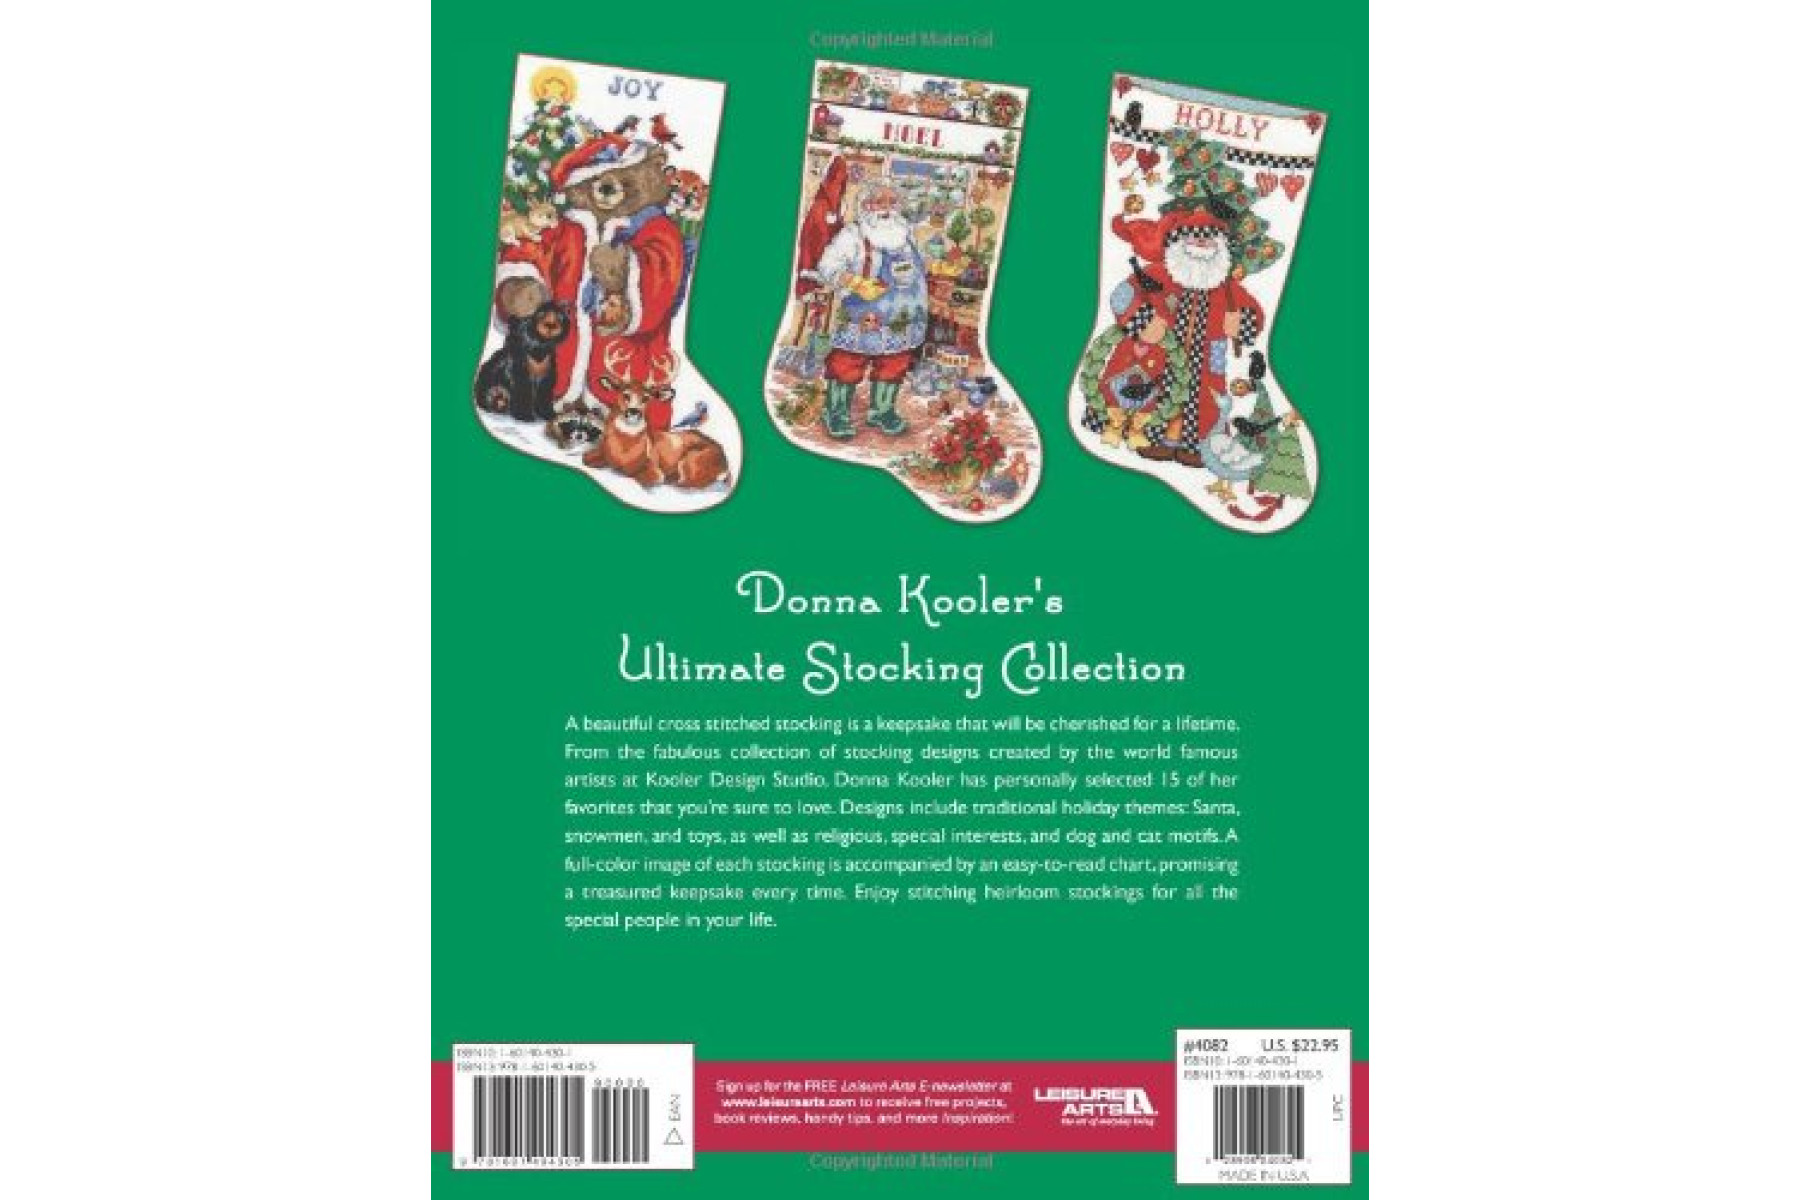 Donna Koolers Ultimate Stocking Collection